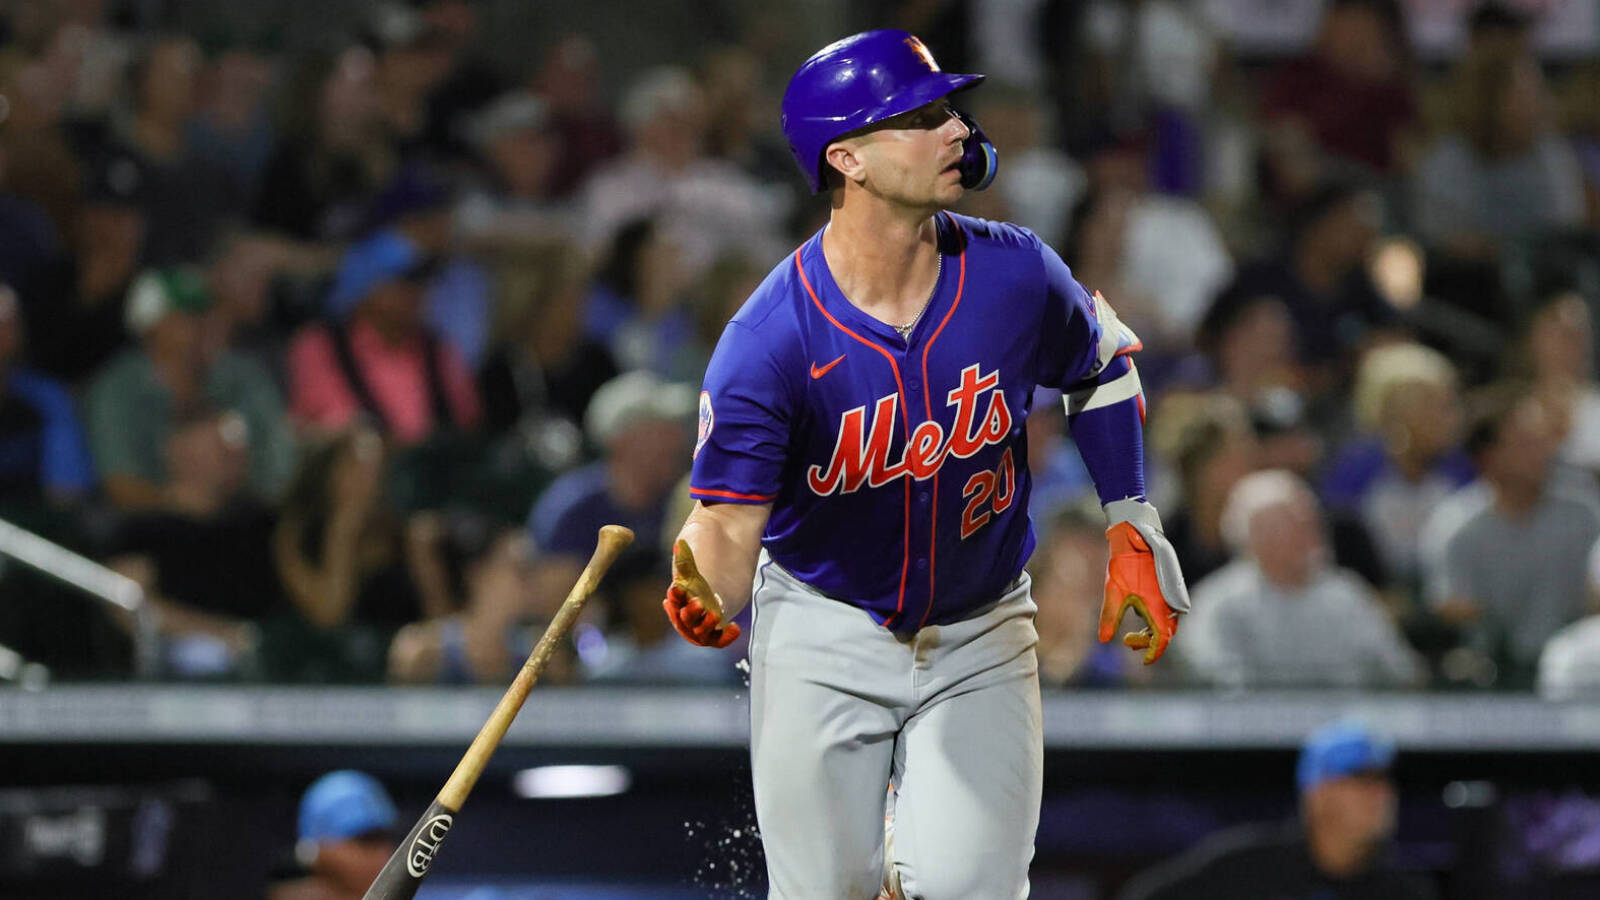 Trade, re-sign or both? The Pete Alonso saga continues with the Mets